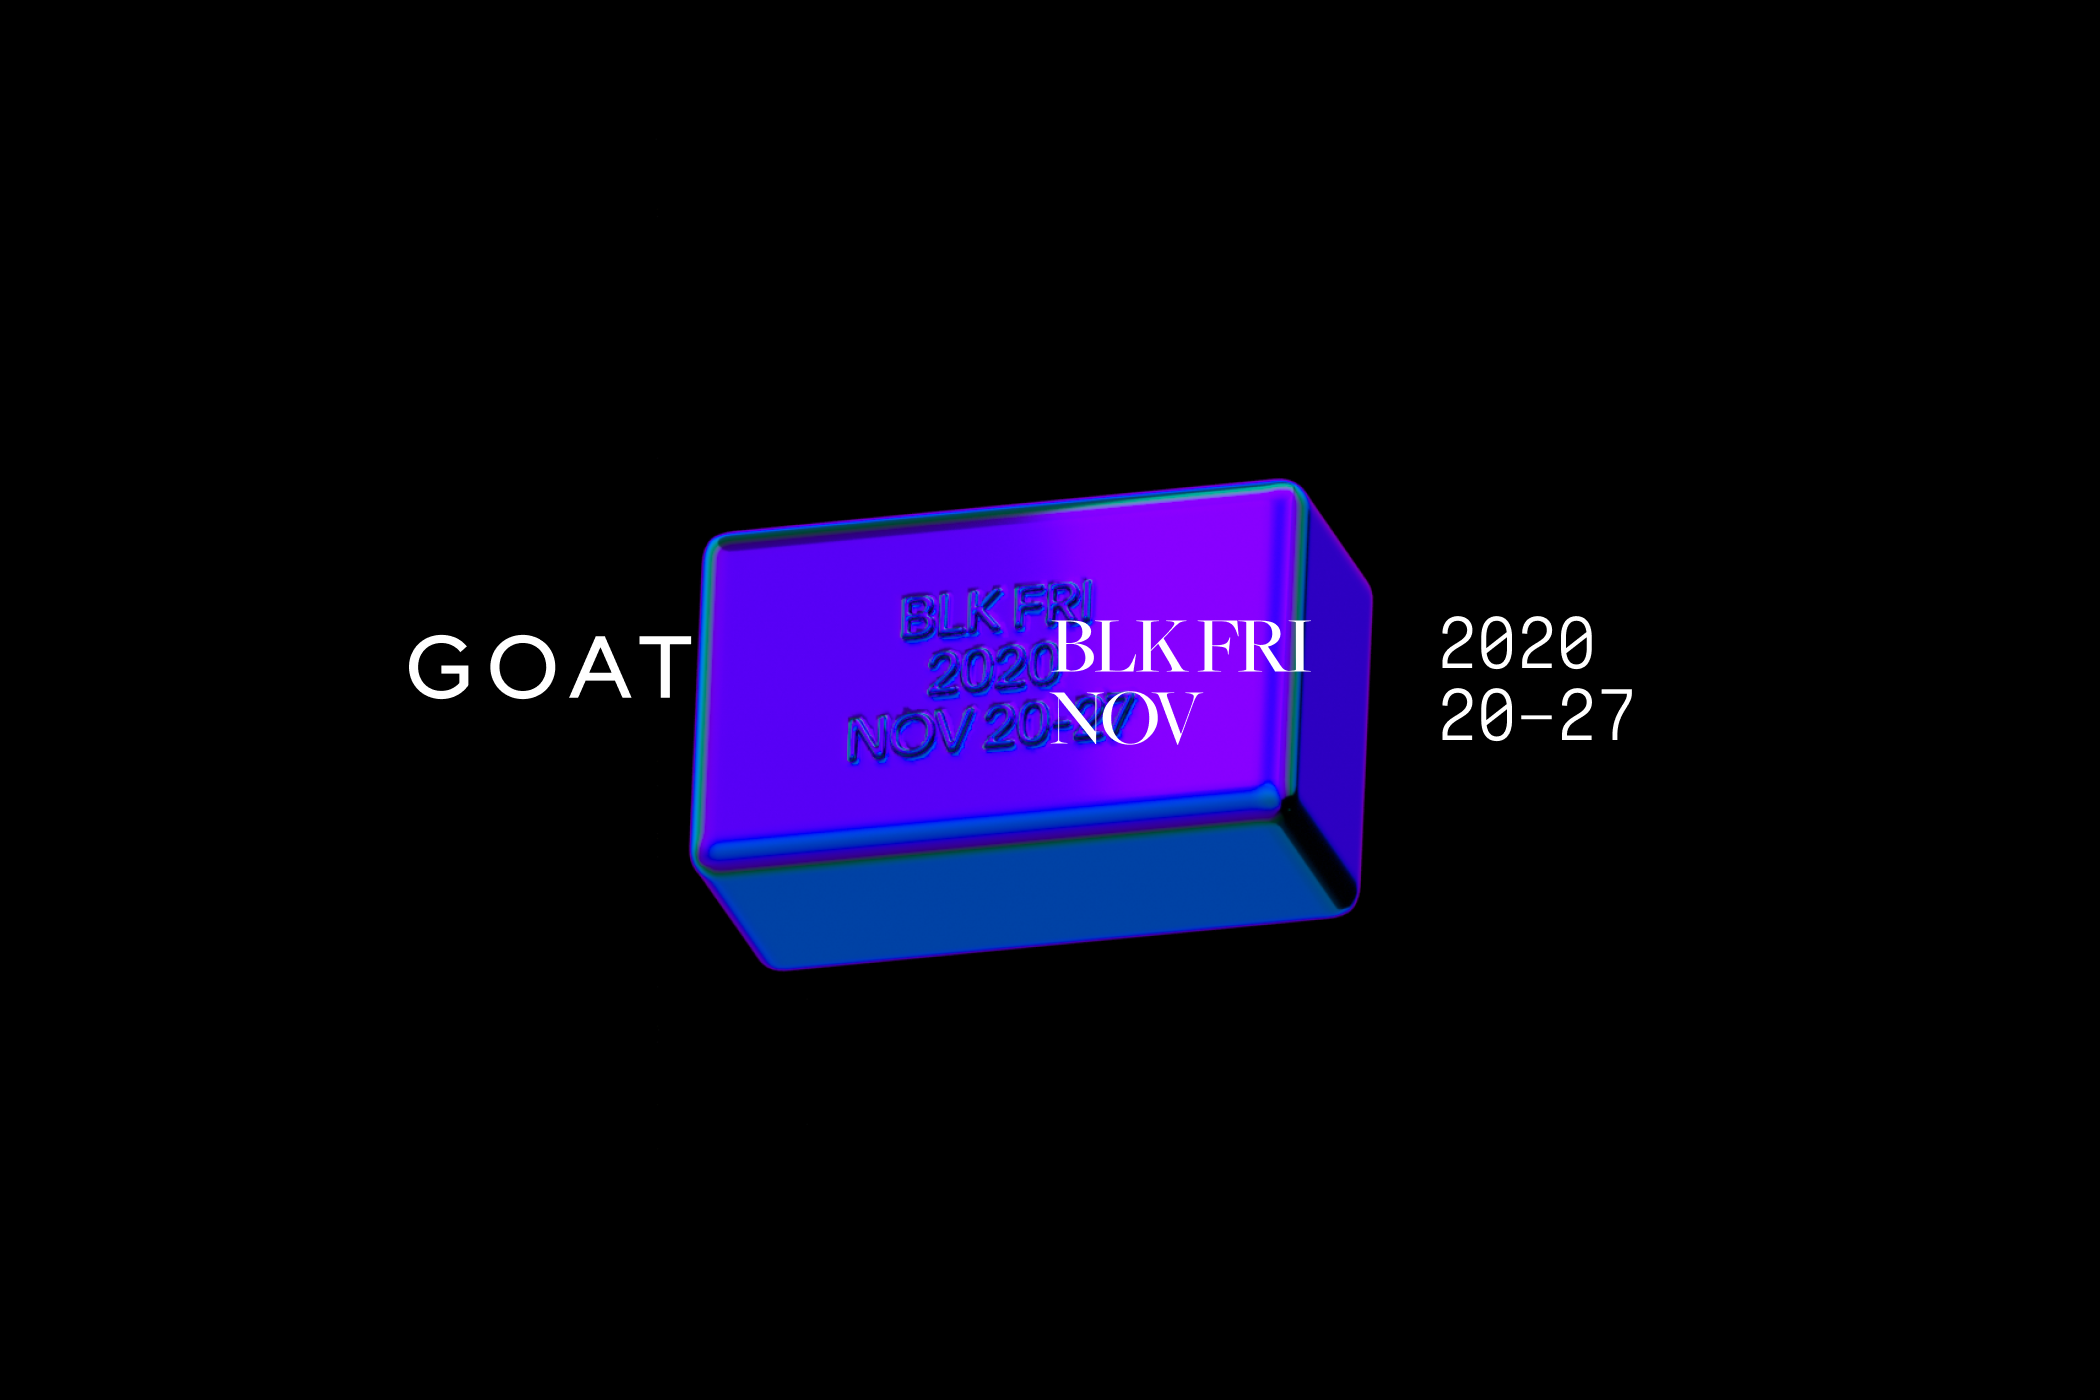 Saweetie, Kyle Kuzma & More Join GOAT For Annual Black Friday Event